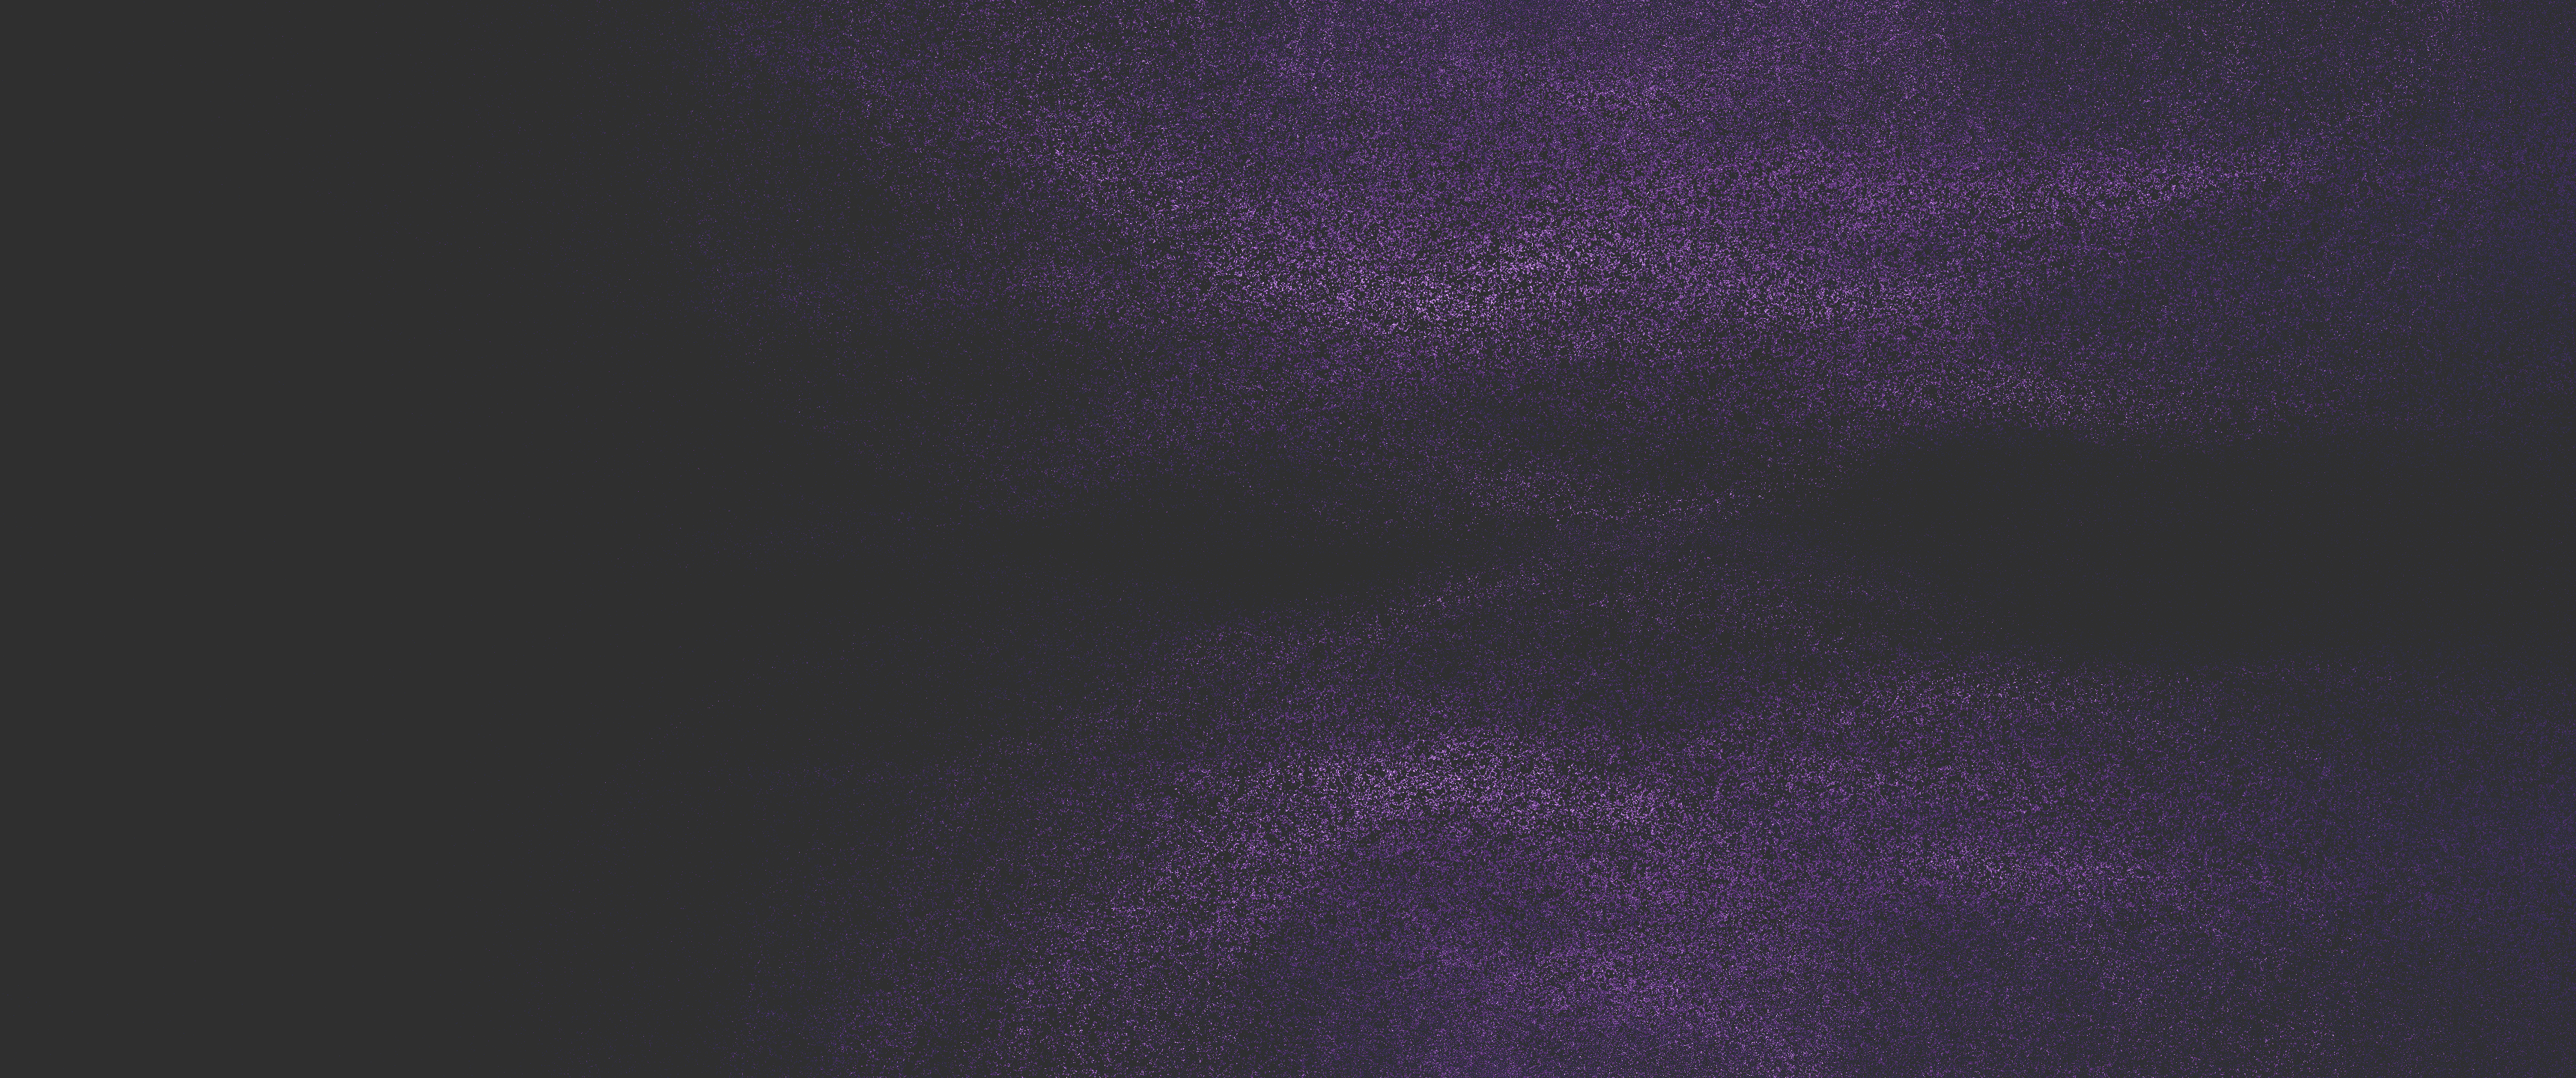 Purple Wide Image Abstract 3440x1440